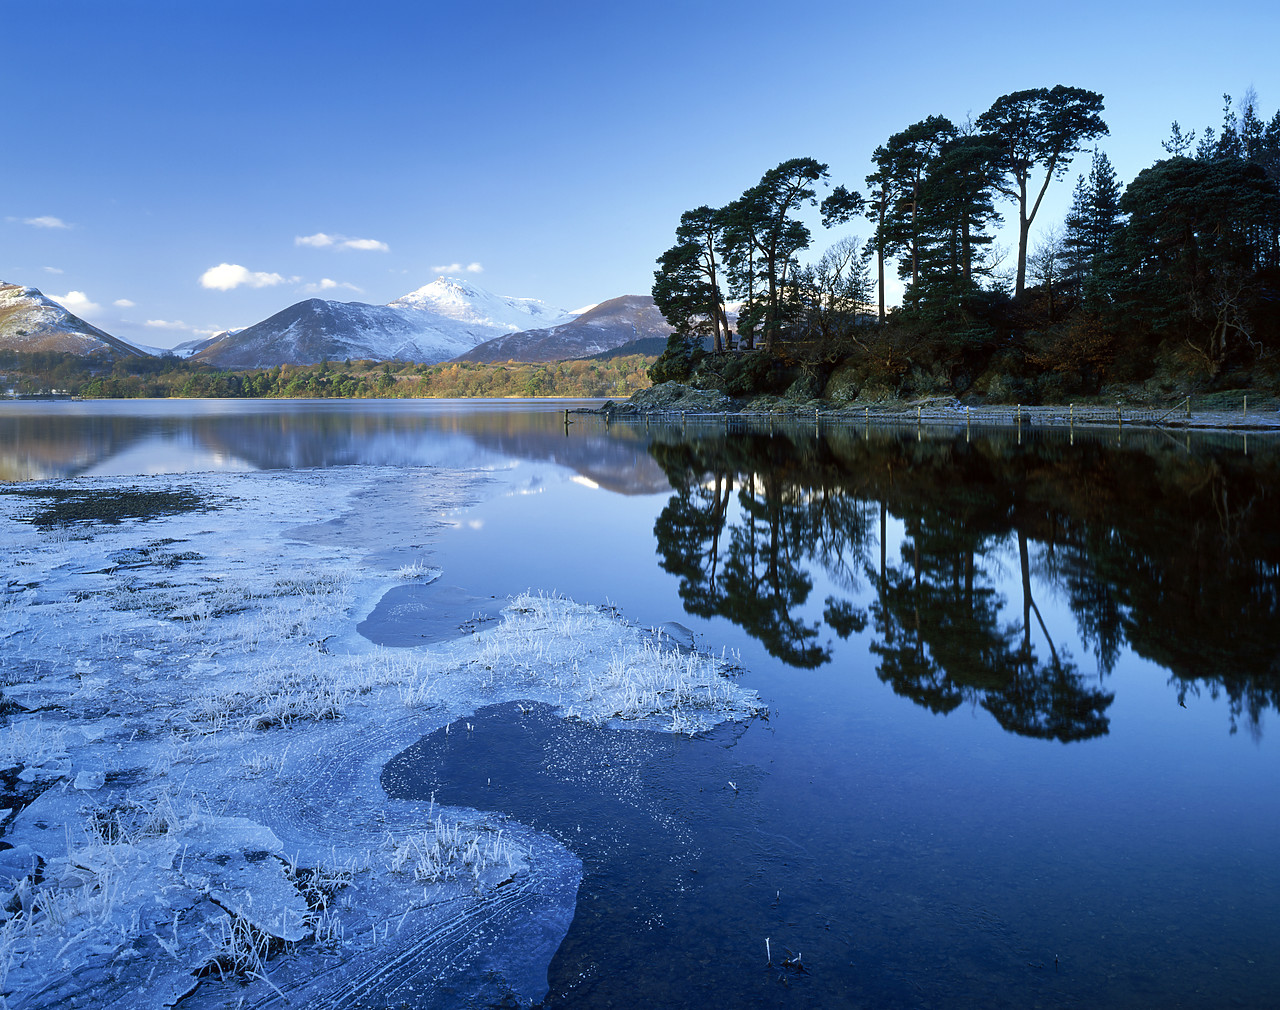 #030000-1 - Friar's Crag Reflections in Winter, Lake District National Park, Cumbria, England